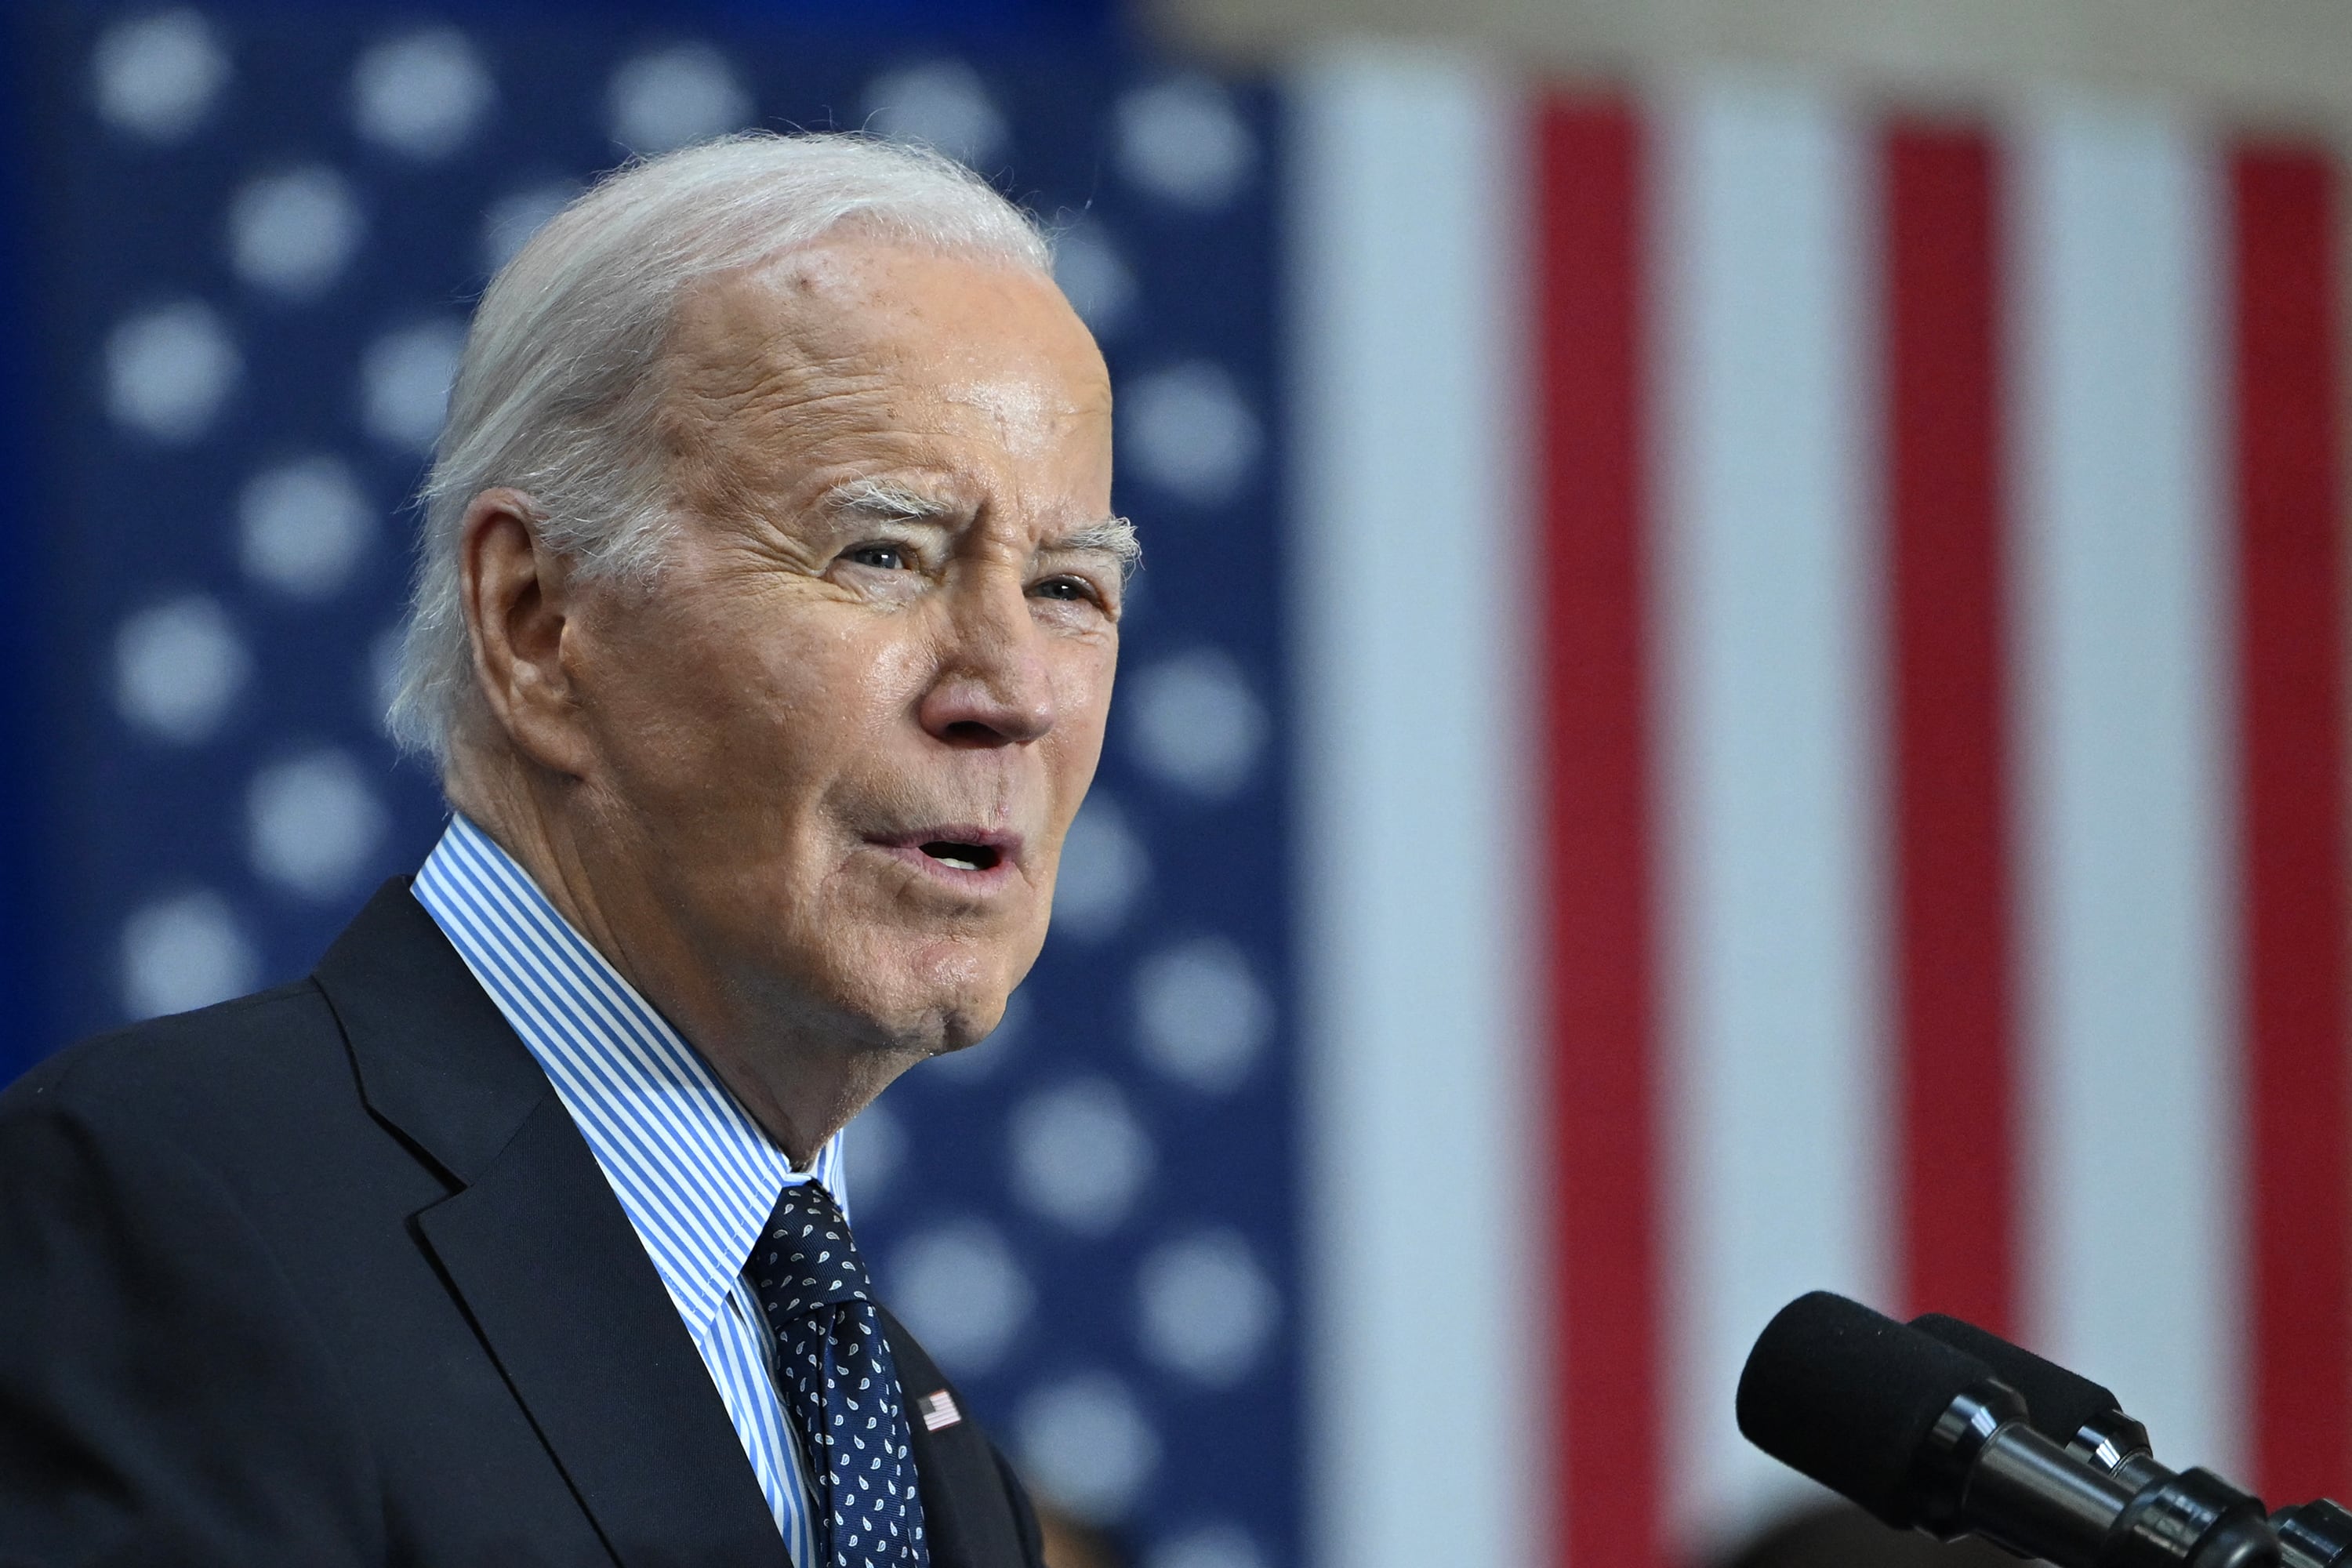 President Biden wears a dark suit and a tie and stands in front of an American flag while speaking at a microphone.